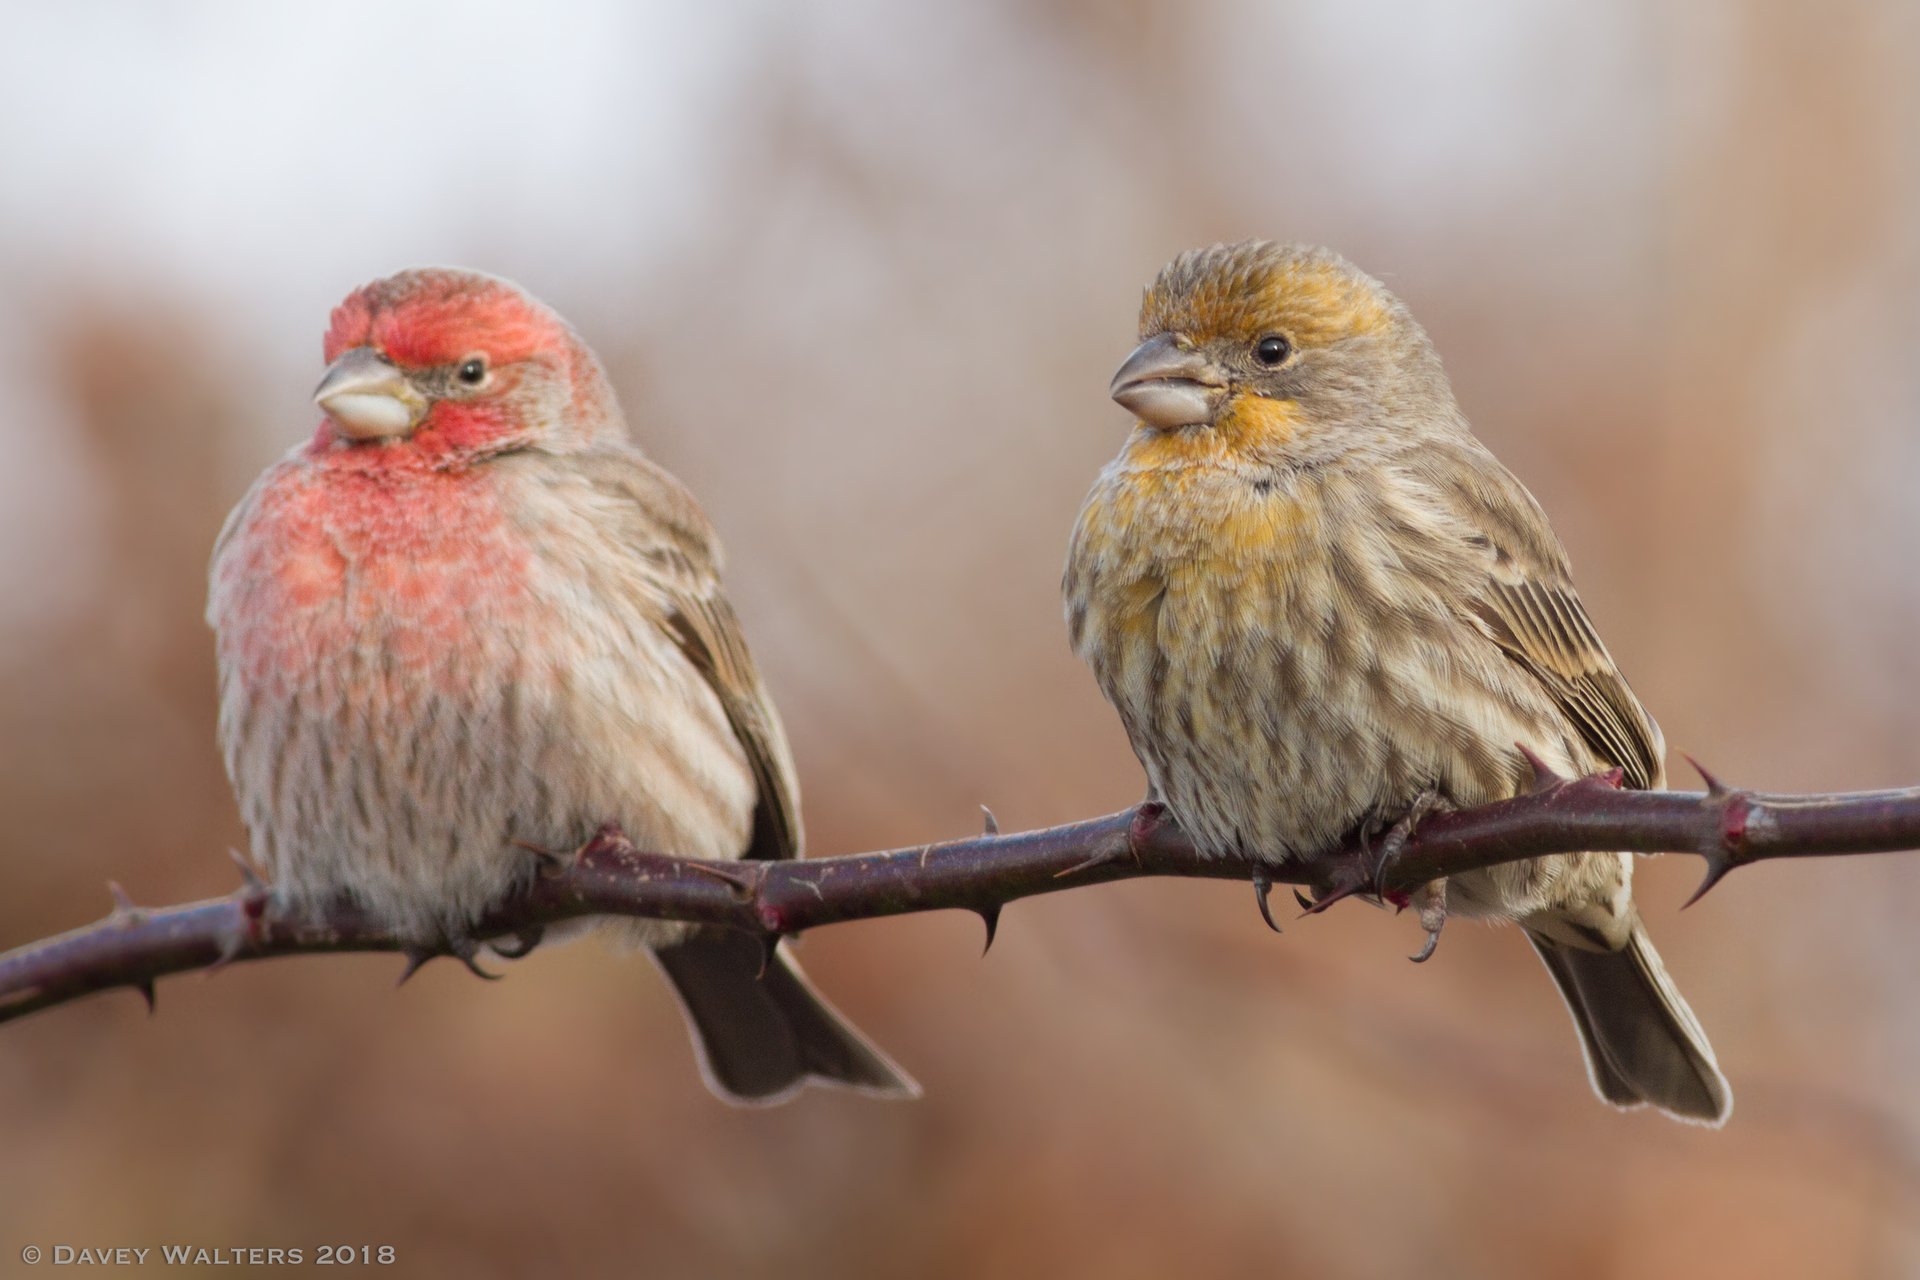 Two house finches sitting on branch, one is tinted red and the other is tinted yellow